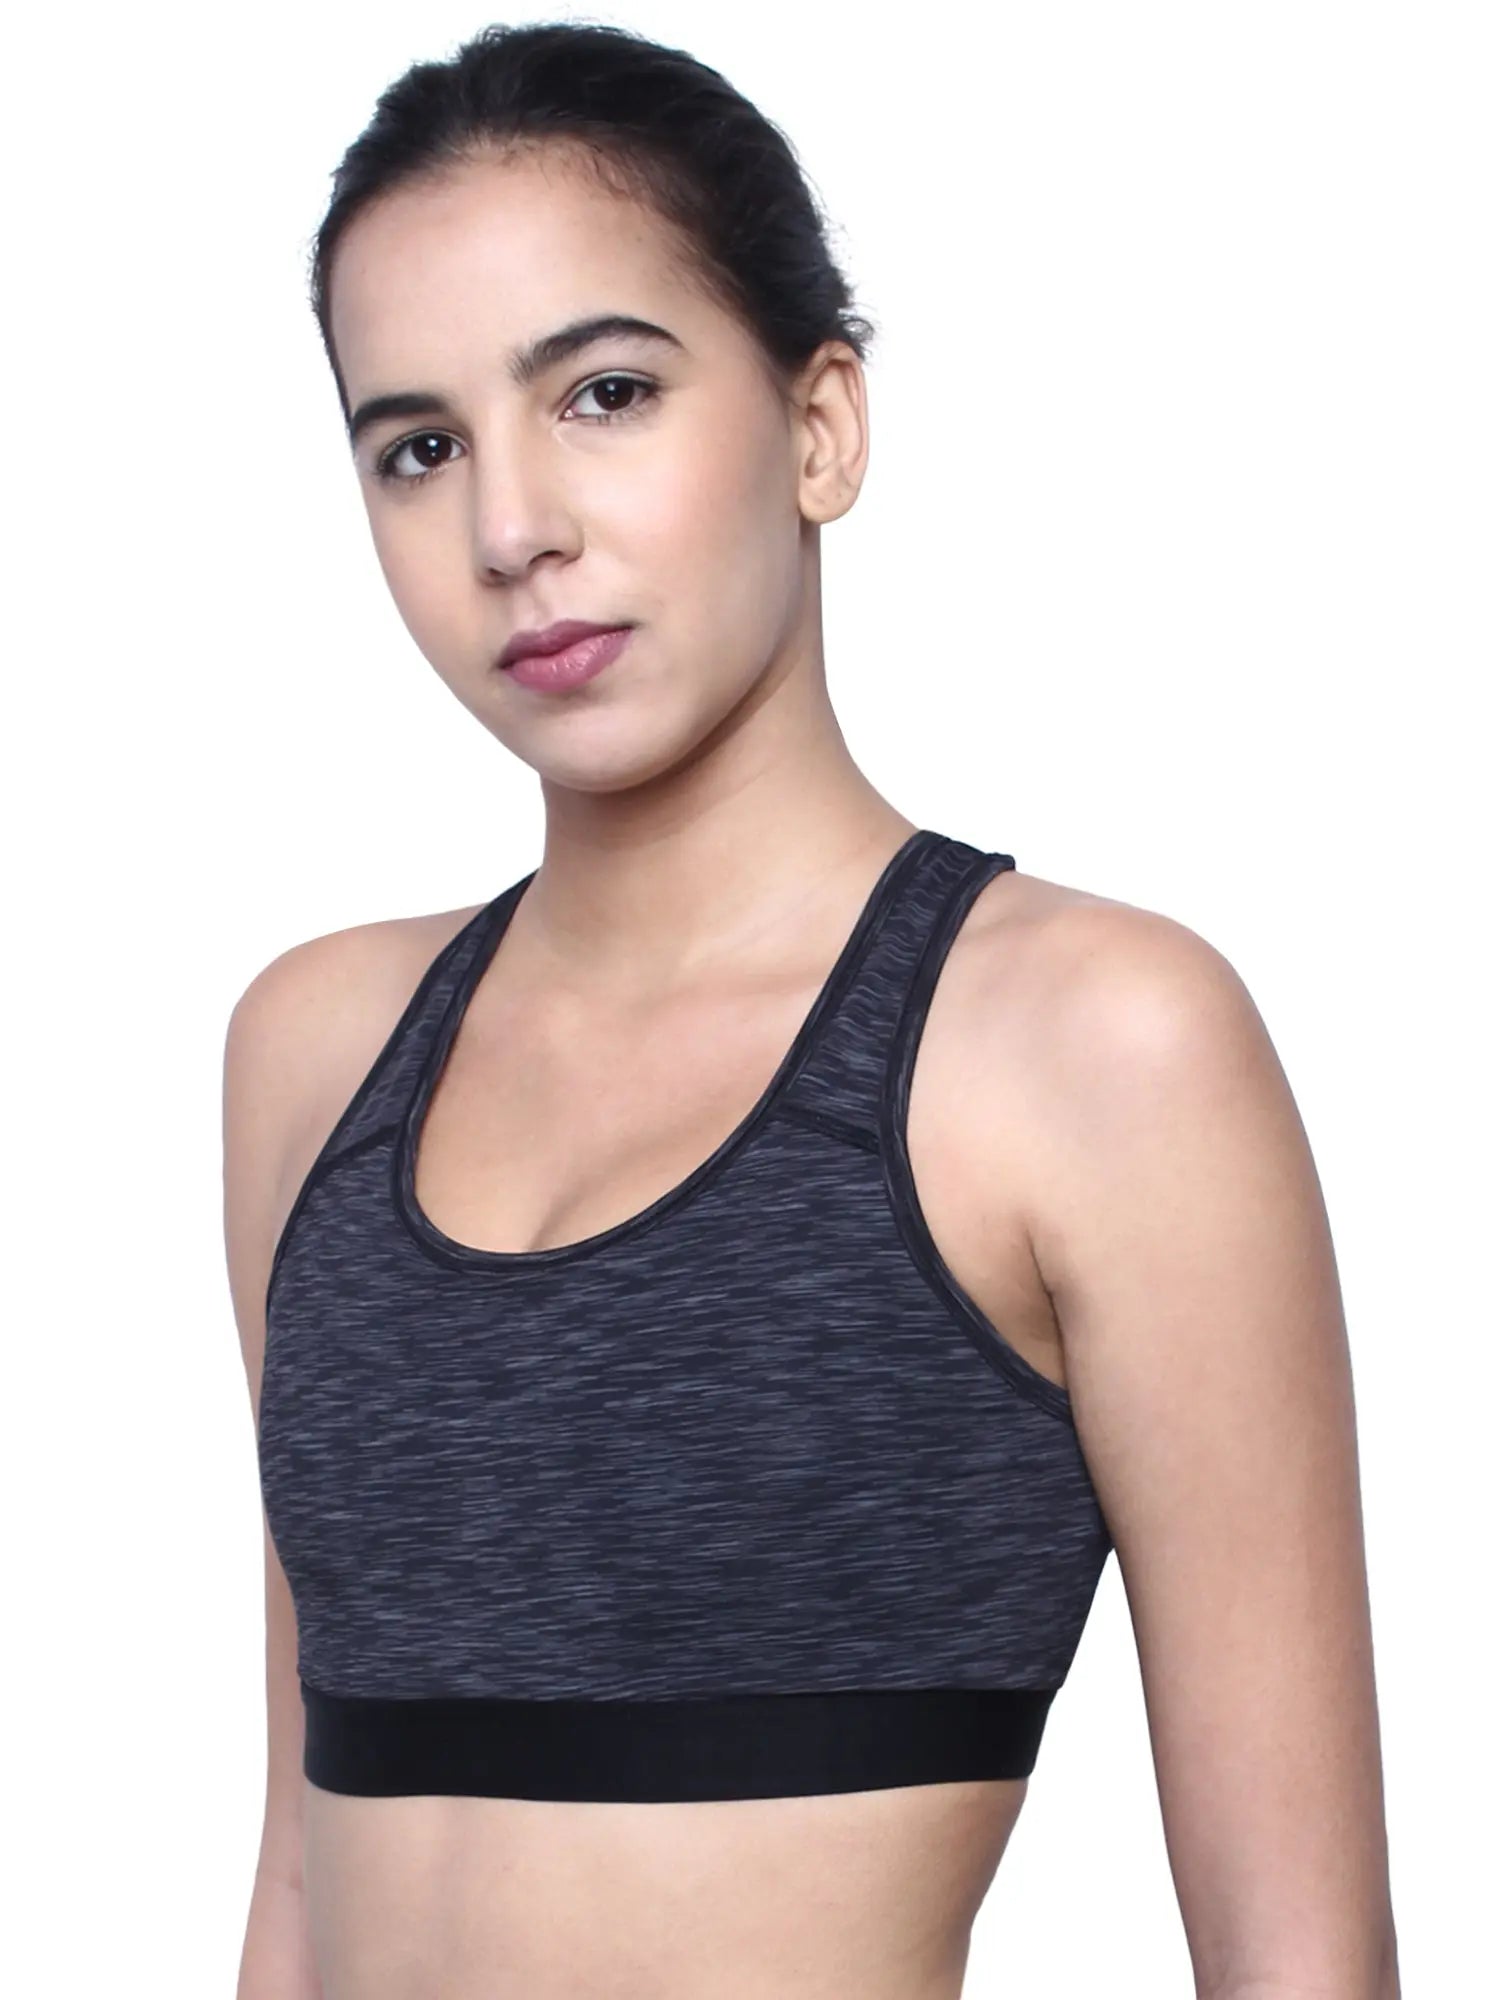 Yoga Tank Tops for Women Padded Sports Bra Workout India